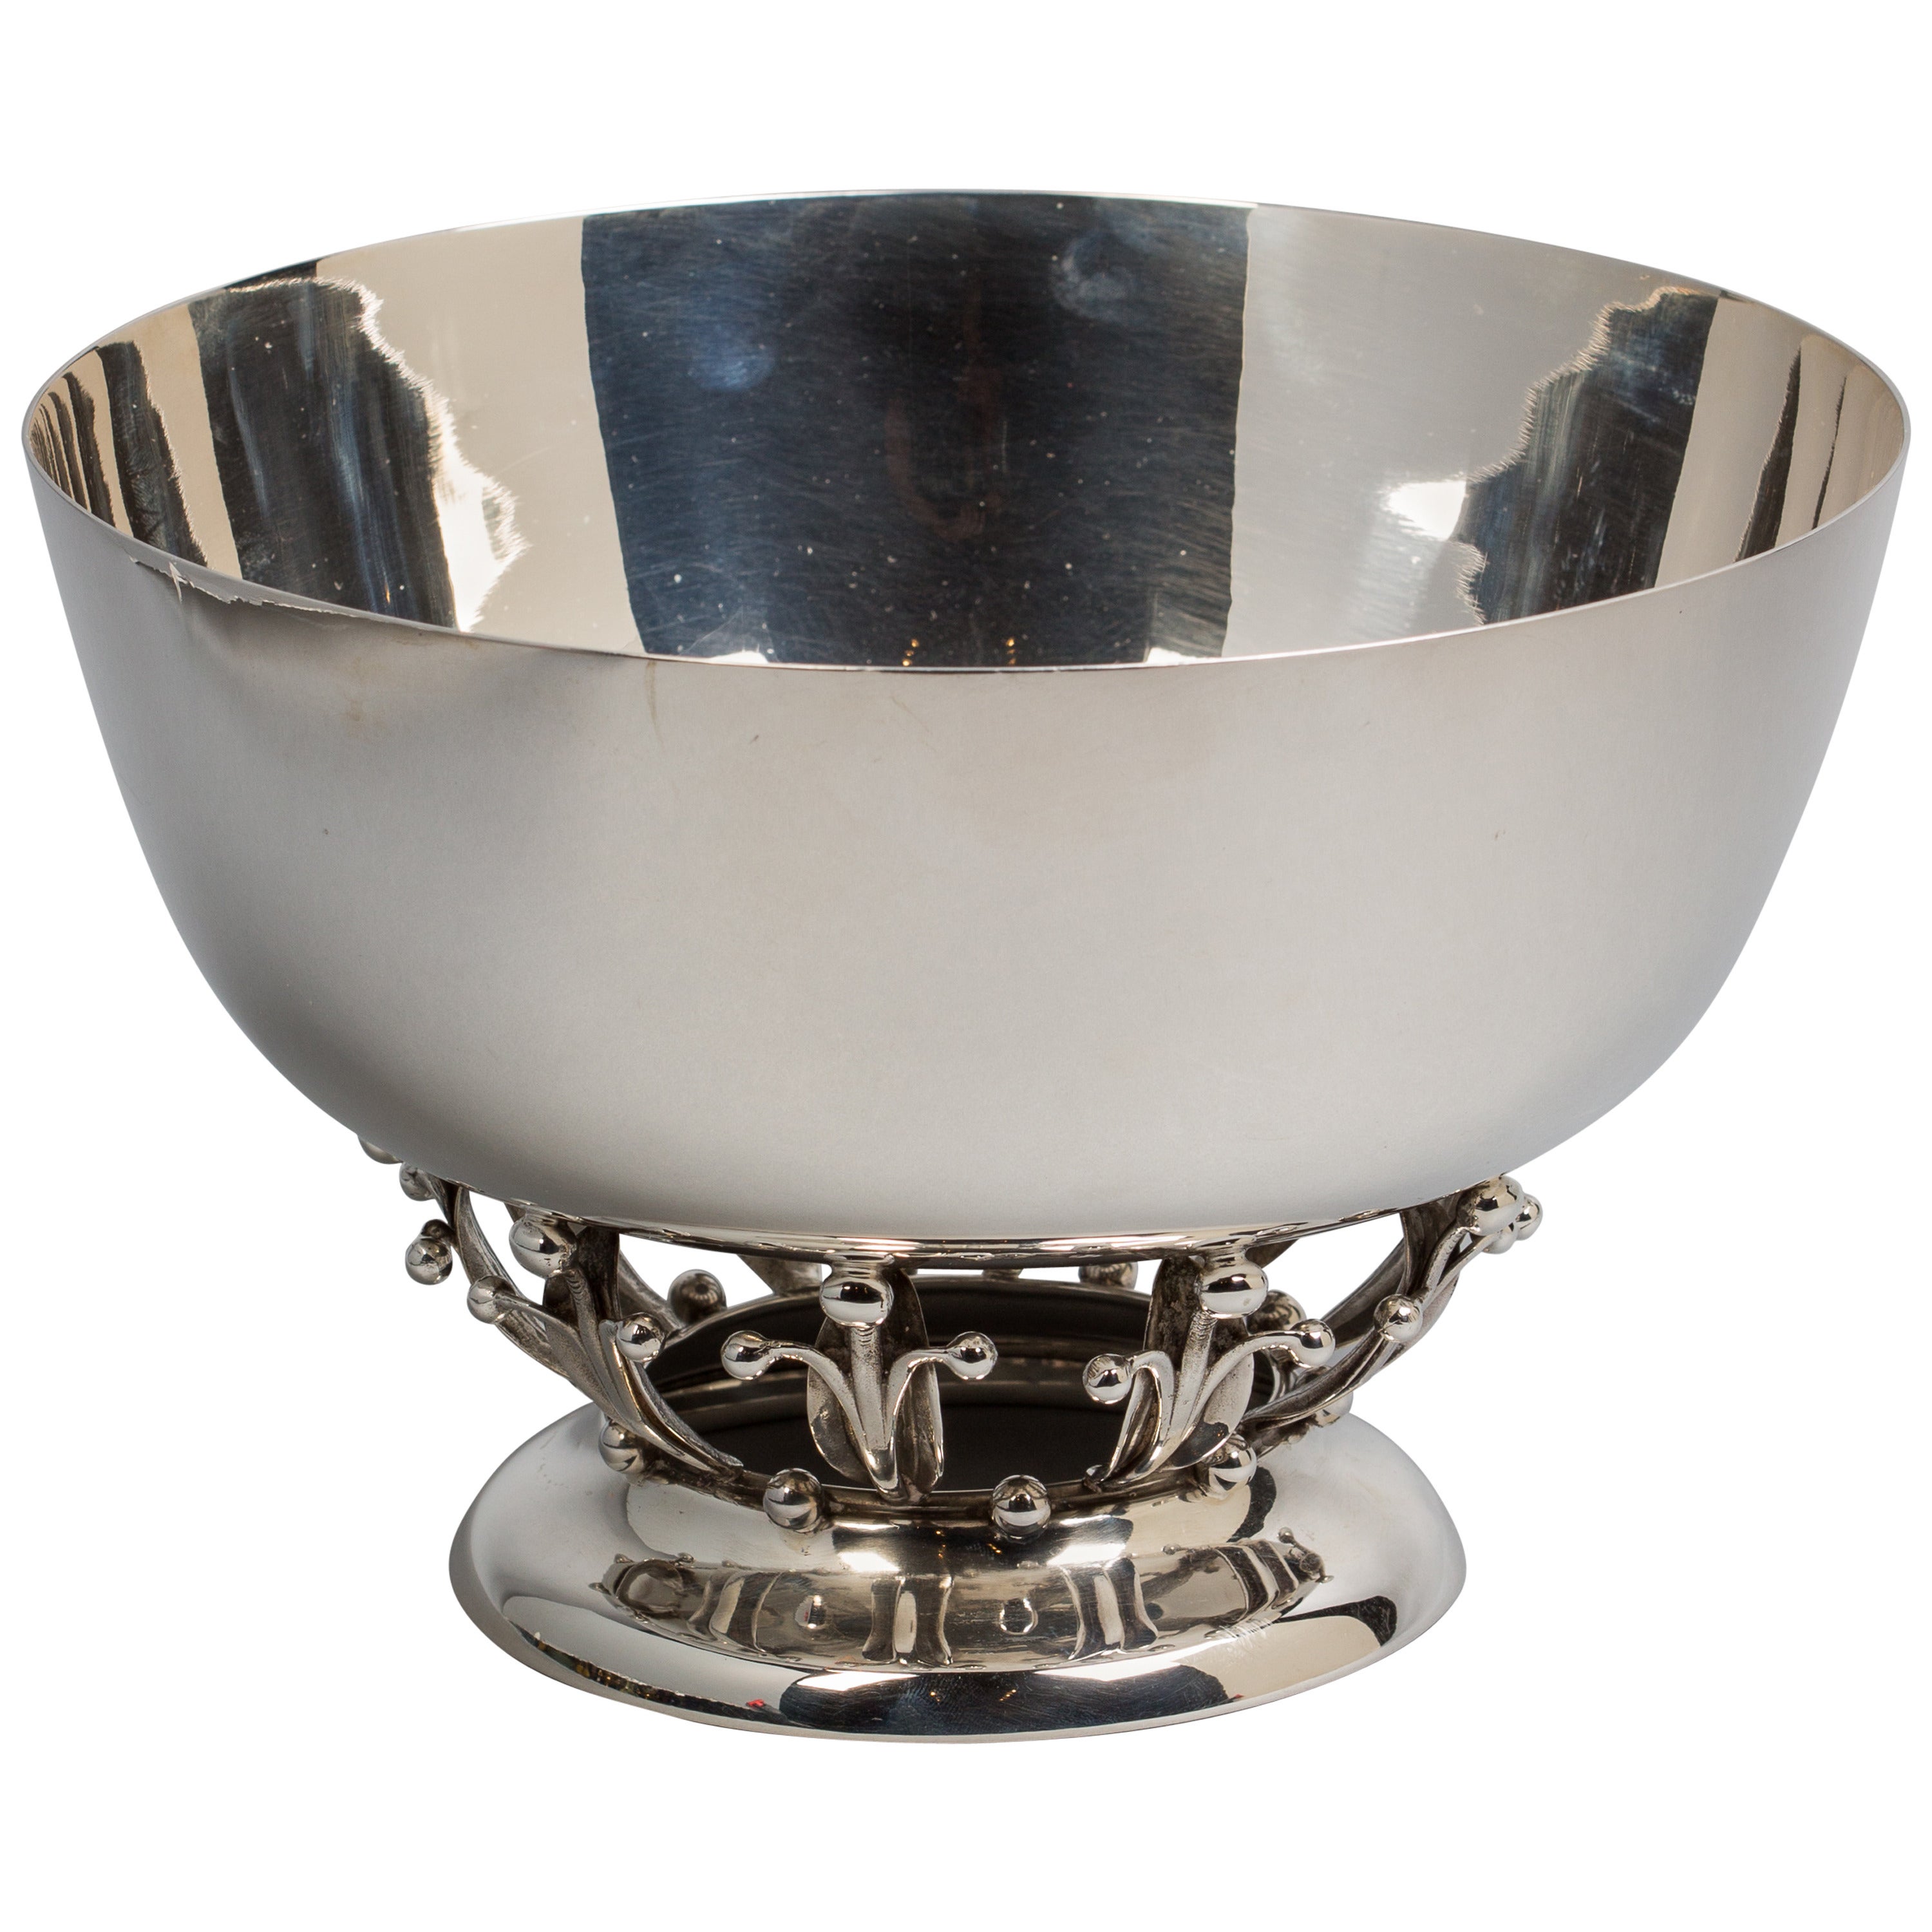 Sterling Silver Bowl, Woodside Sterling Company, New York, circa 1920